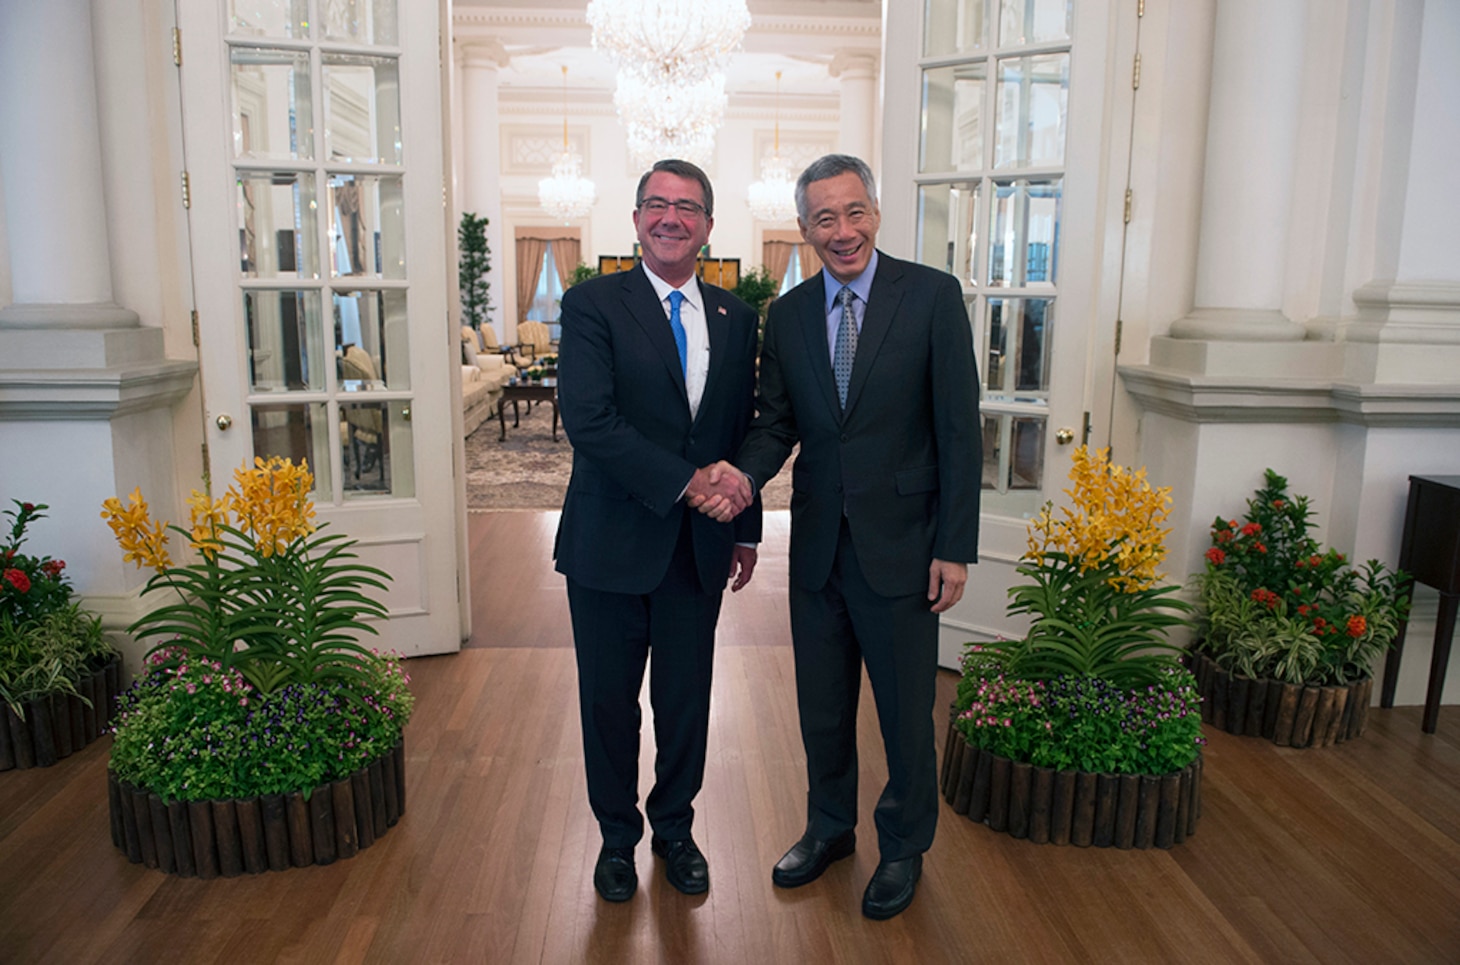 SINGAPORE (June 3, 2016) Secretary of Defense Ash Carter greets Singapore Prime Minister Mr Lee Hsien Loong  in Singapore, June 3, 2016. Carter is in Singapore attending the 15th International Institute for Strategic Studies Asia Security Summit. 